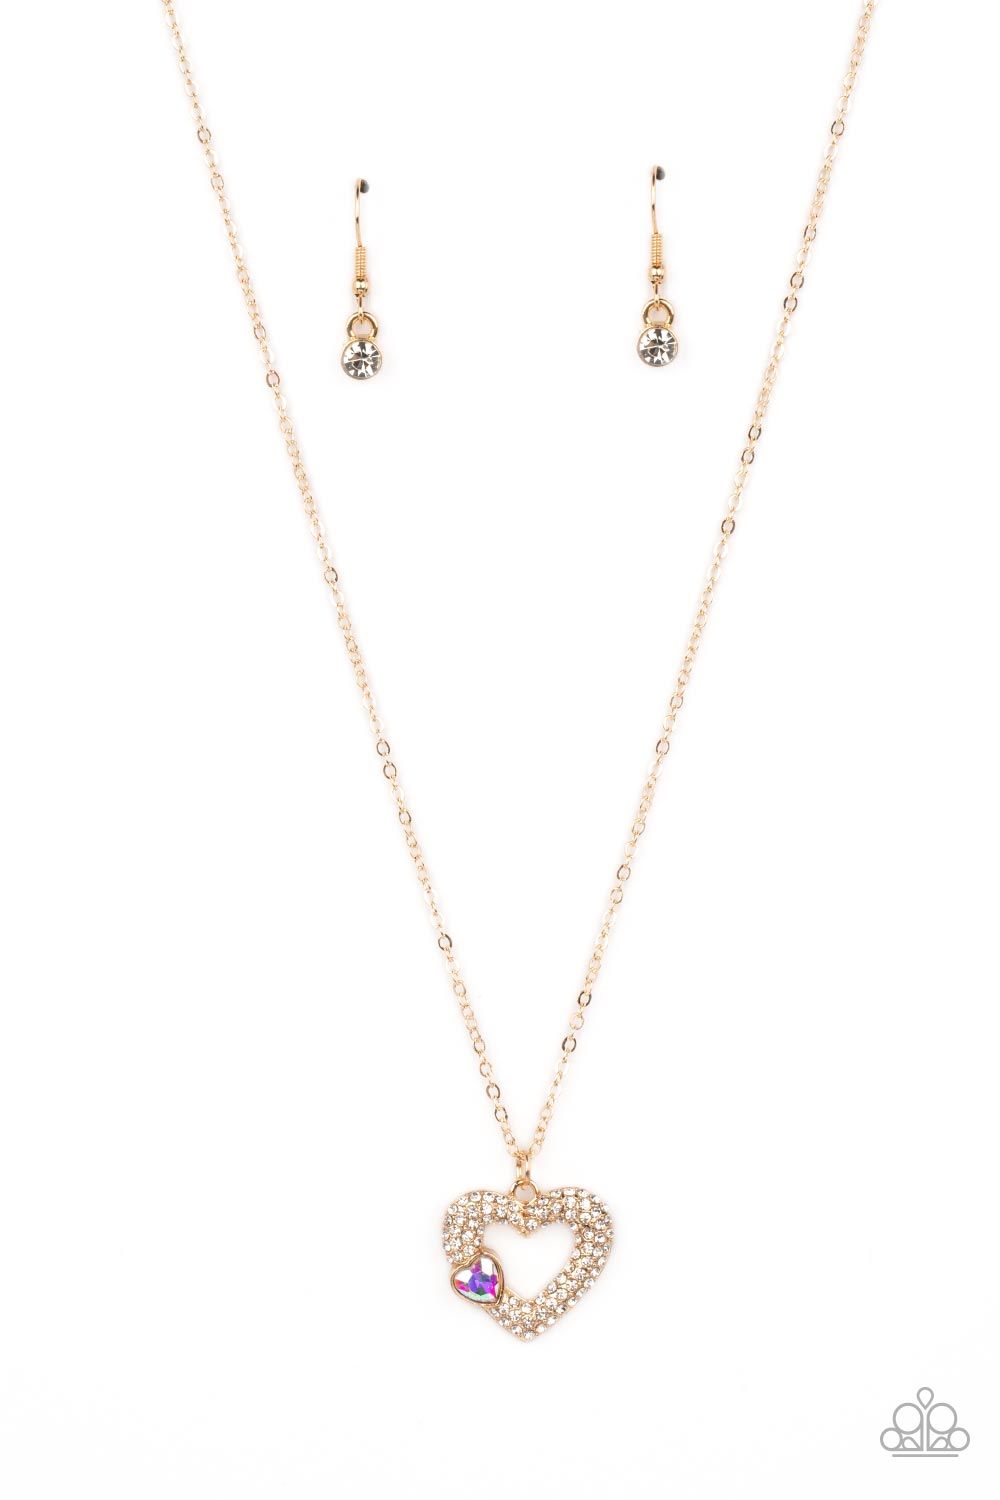 Bedazzled Bliss Multi Necklace - Paparazzi Accessories   A luxurious airy gold heart lush with glassy white rhinestones swings from a classic gold chain. A faceted heart gem brushed in an iridescent shimmer graces one side of the larger bedazzled heart for a romantic finish. Features an adjustable clasp closure. Due to its prismatic palette, color may vary.  Sold as one individual necklace. Includes one pair of matching earrings.